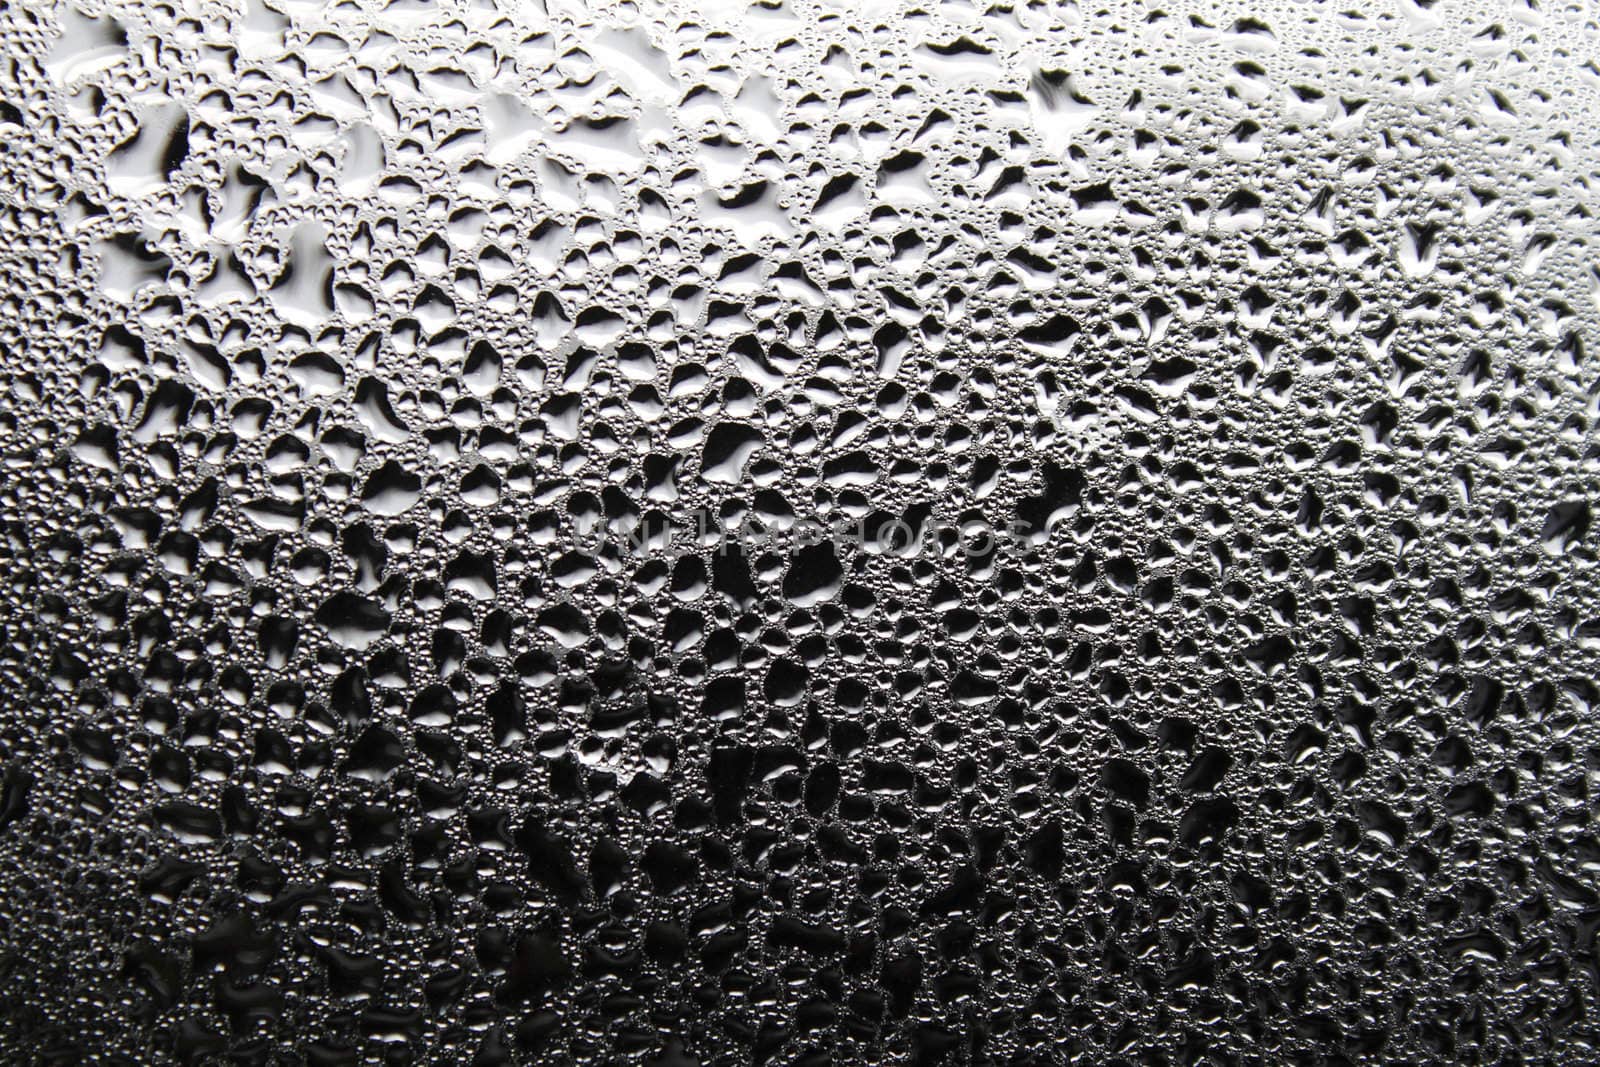 Drops of dew on the window glass